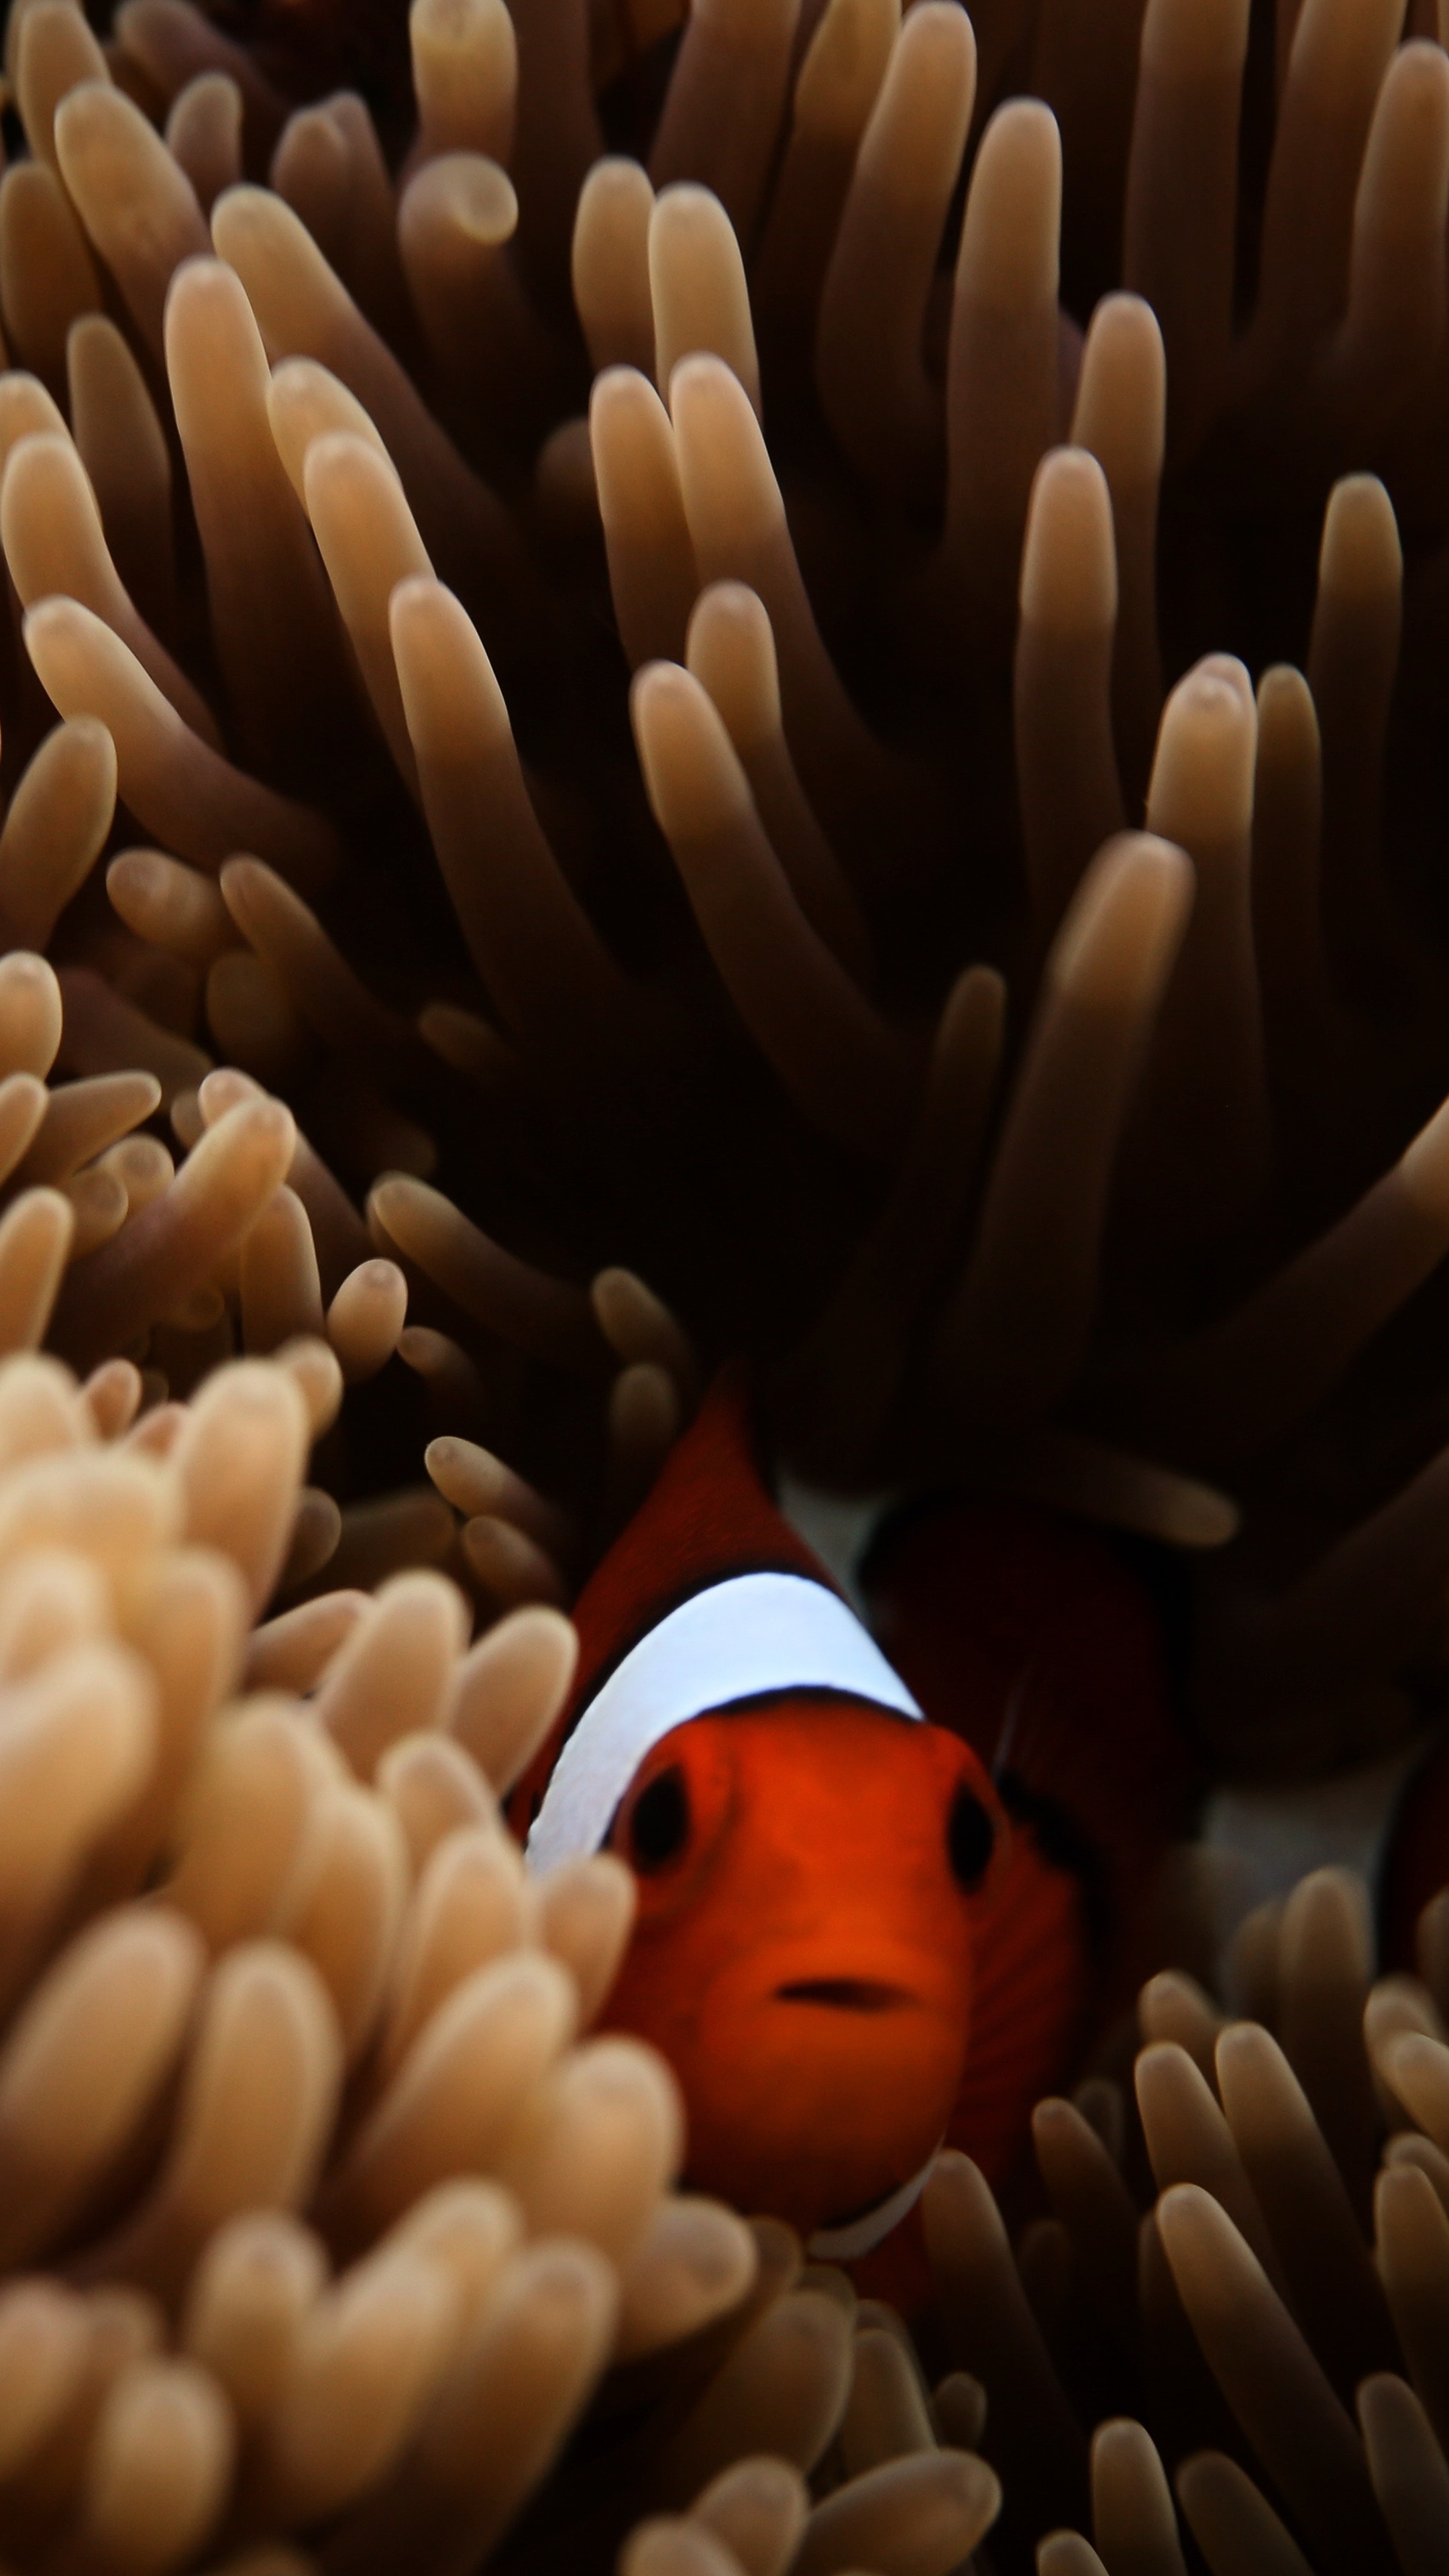 Clownfish sea adventure, Exquisite 5k images, Sony Xperia showcase, Stunning photography, 2160x3840 4K Handy